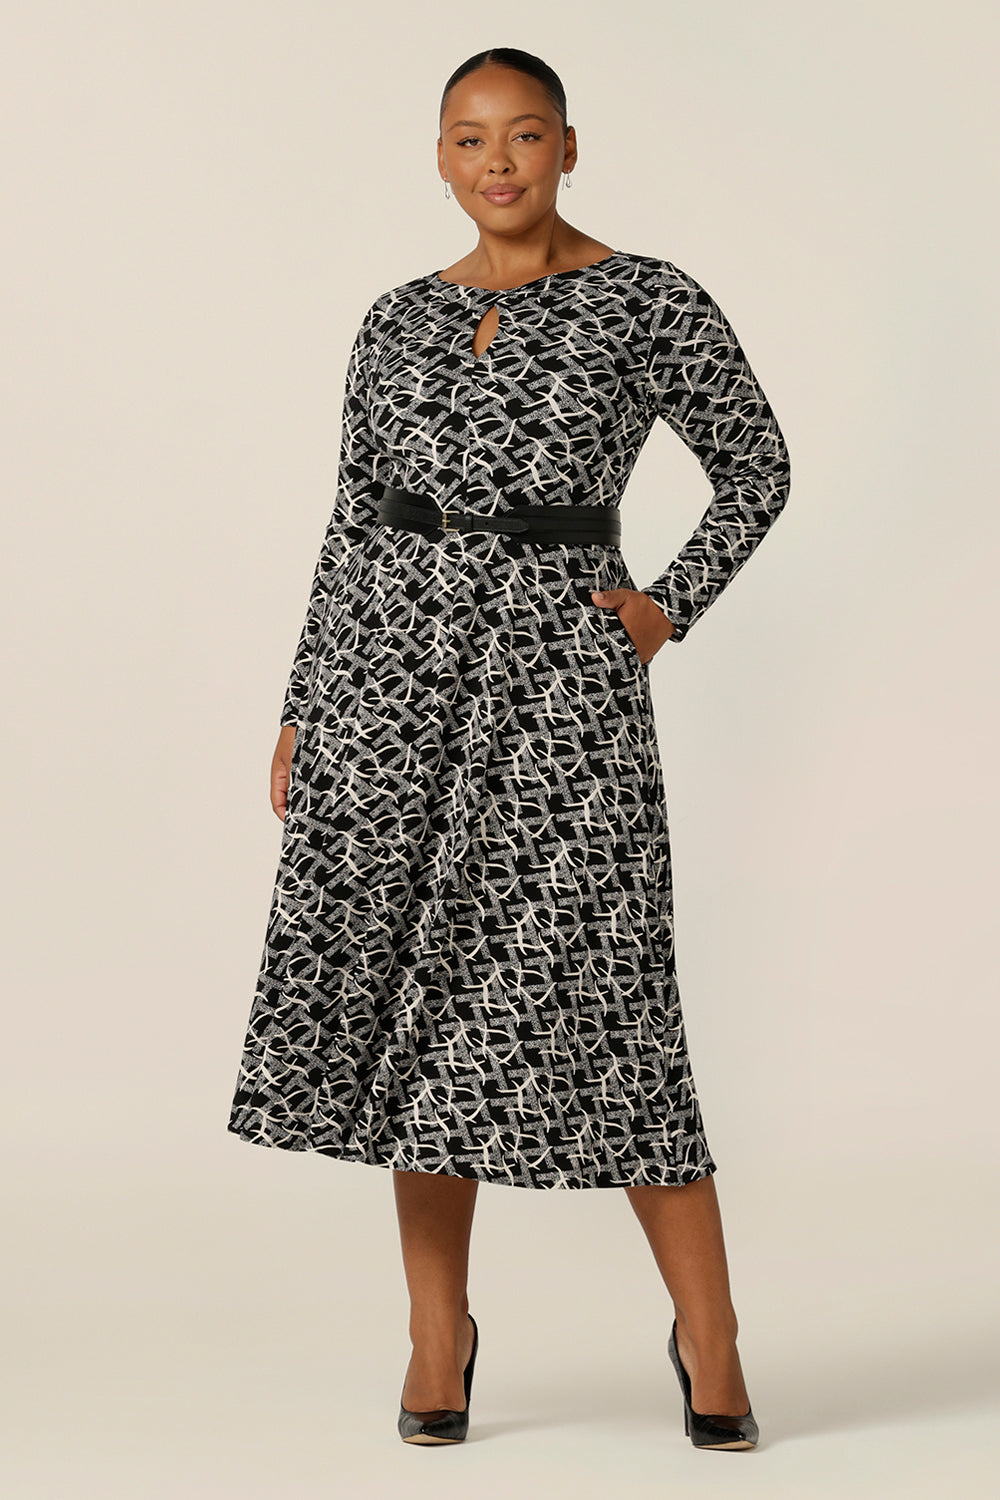 A size 18, plus size woman wears a midi length, long sleeve dress with twisted keyhole detail. Made by Australian and New Zealand women's clothing brand, L&F, shop this black and white print jersey dress in an inclusive size range of sizes 8 to 24.